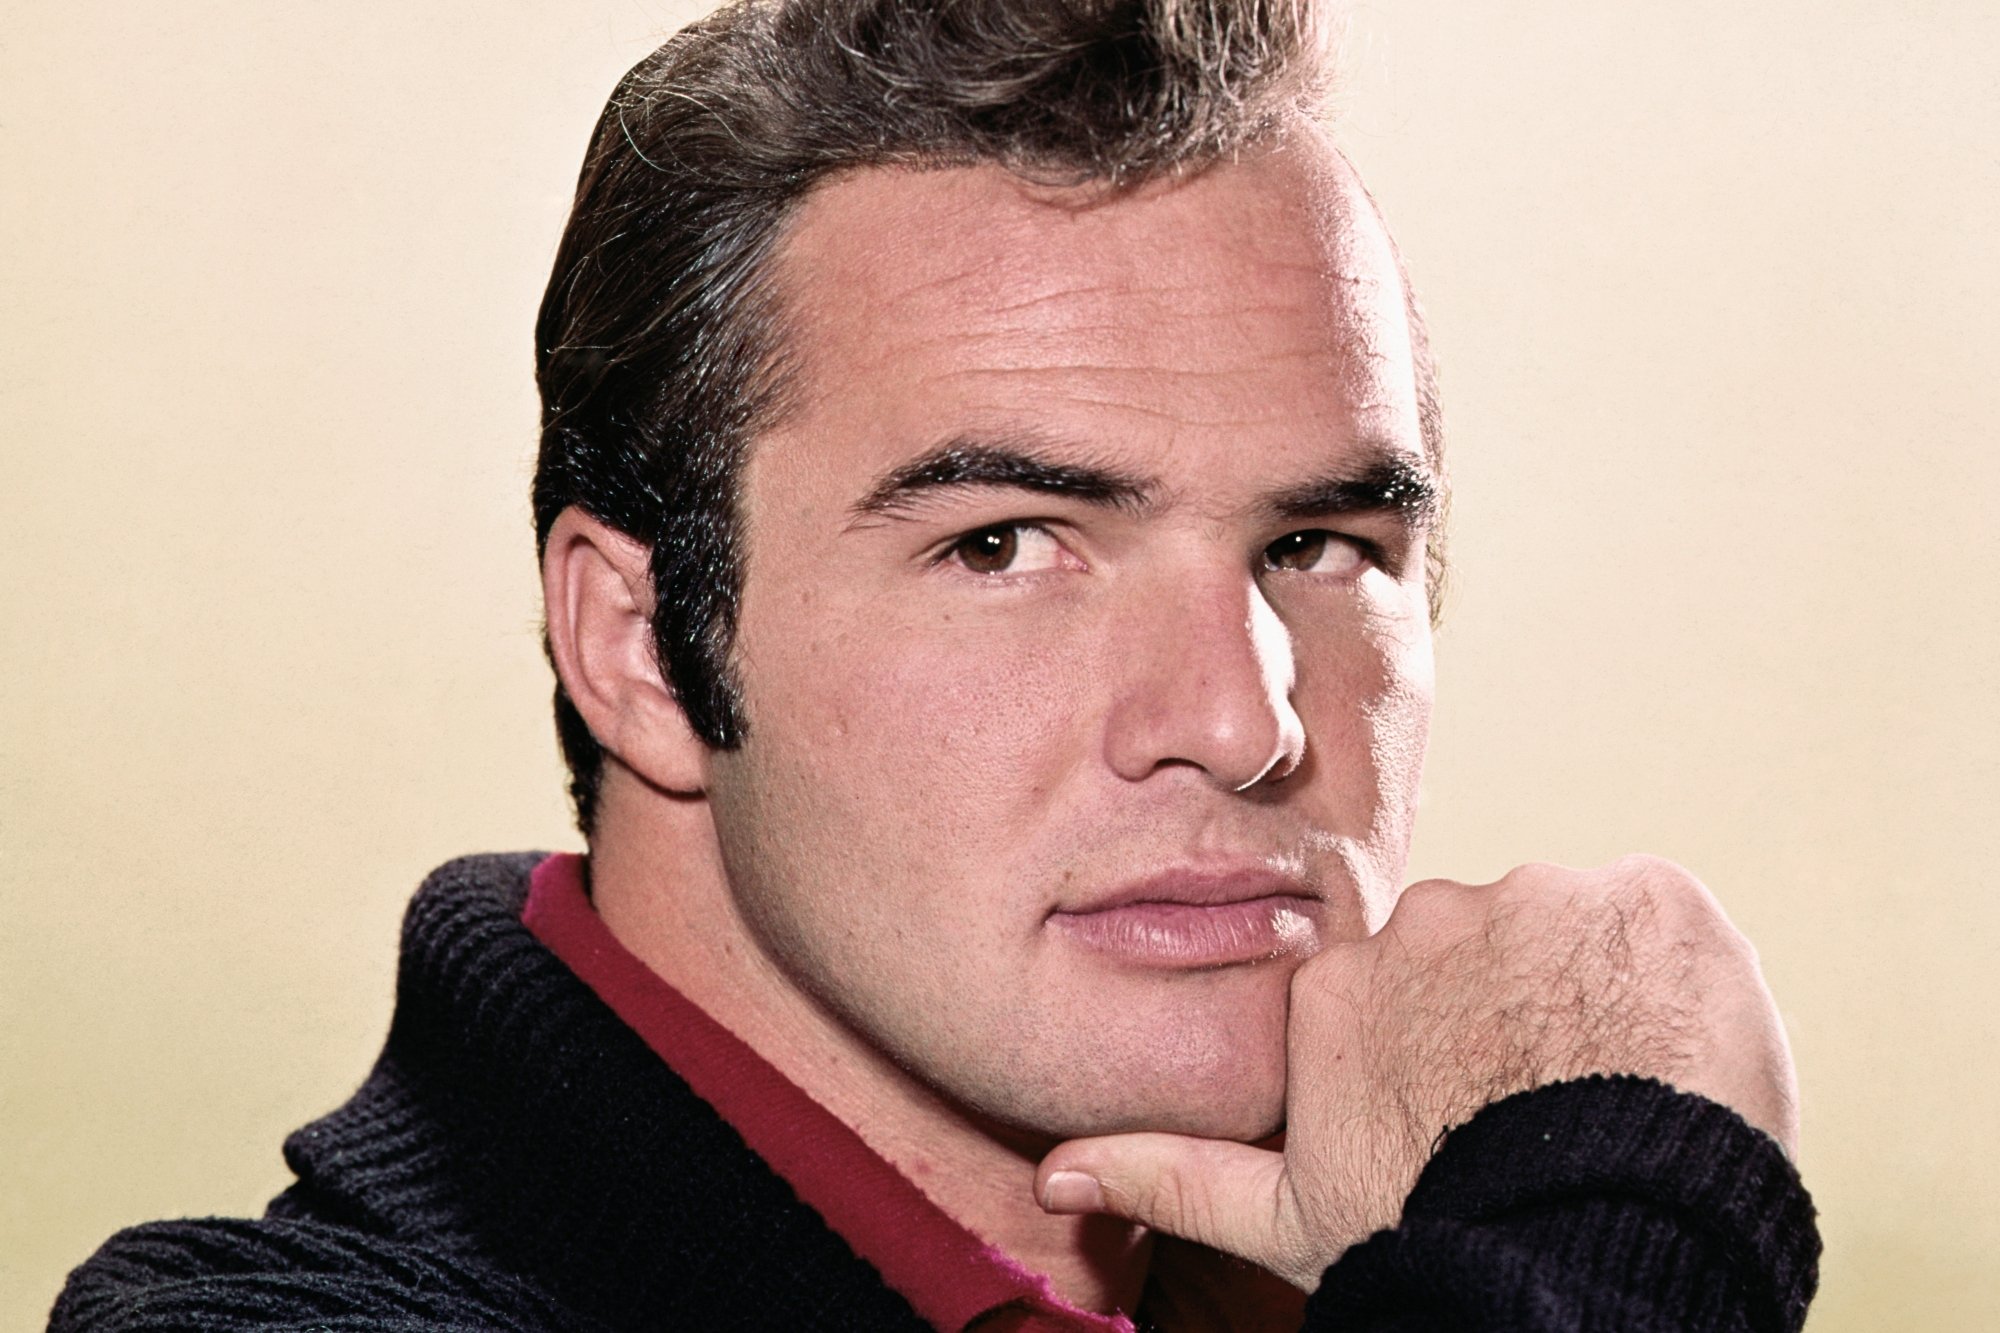 Gunsmoke: Burt Reynolds holding his thumb under his chin in front of a blank background